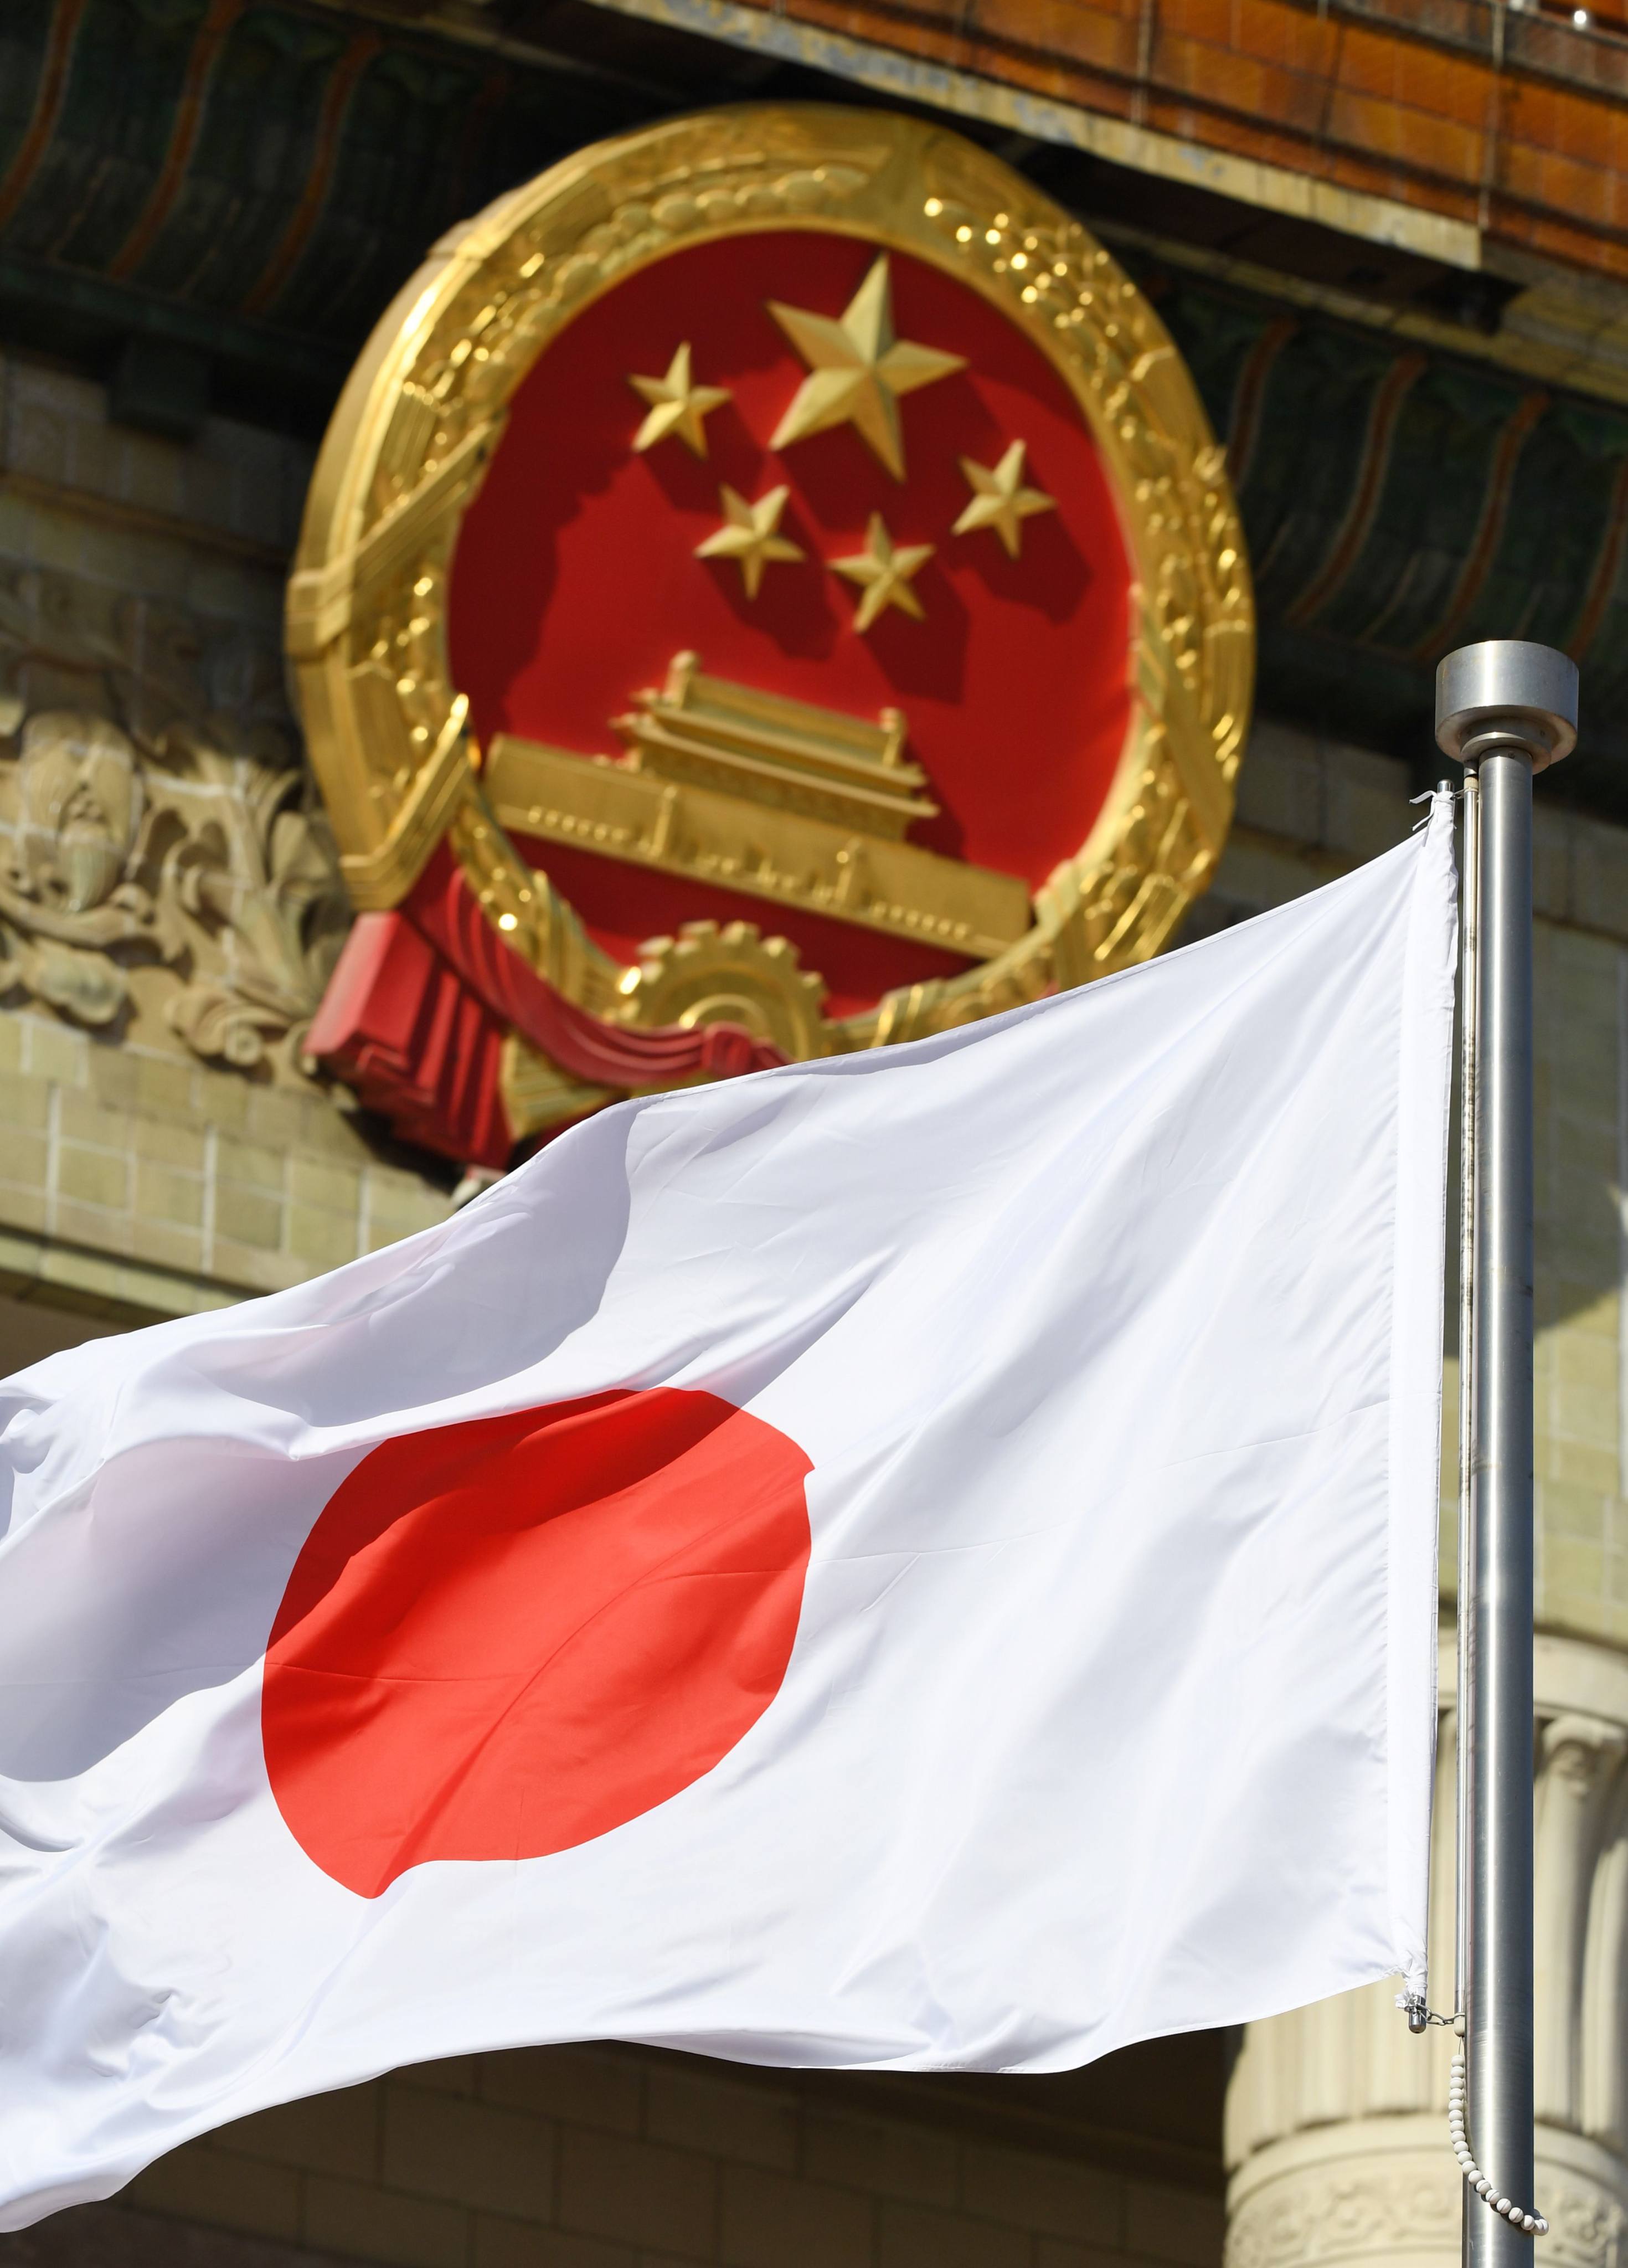 The Japanese flag flies near the emblem of the People’s Republic of China. Photo: AFP